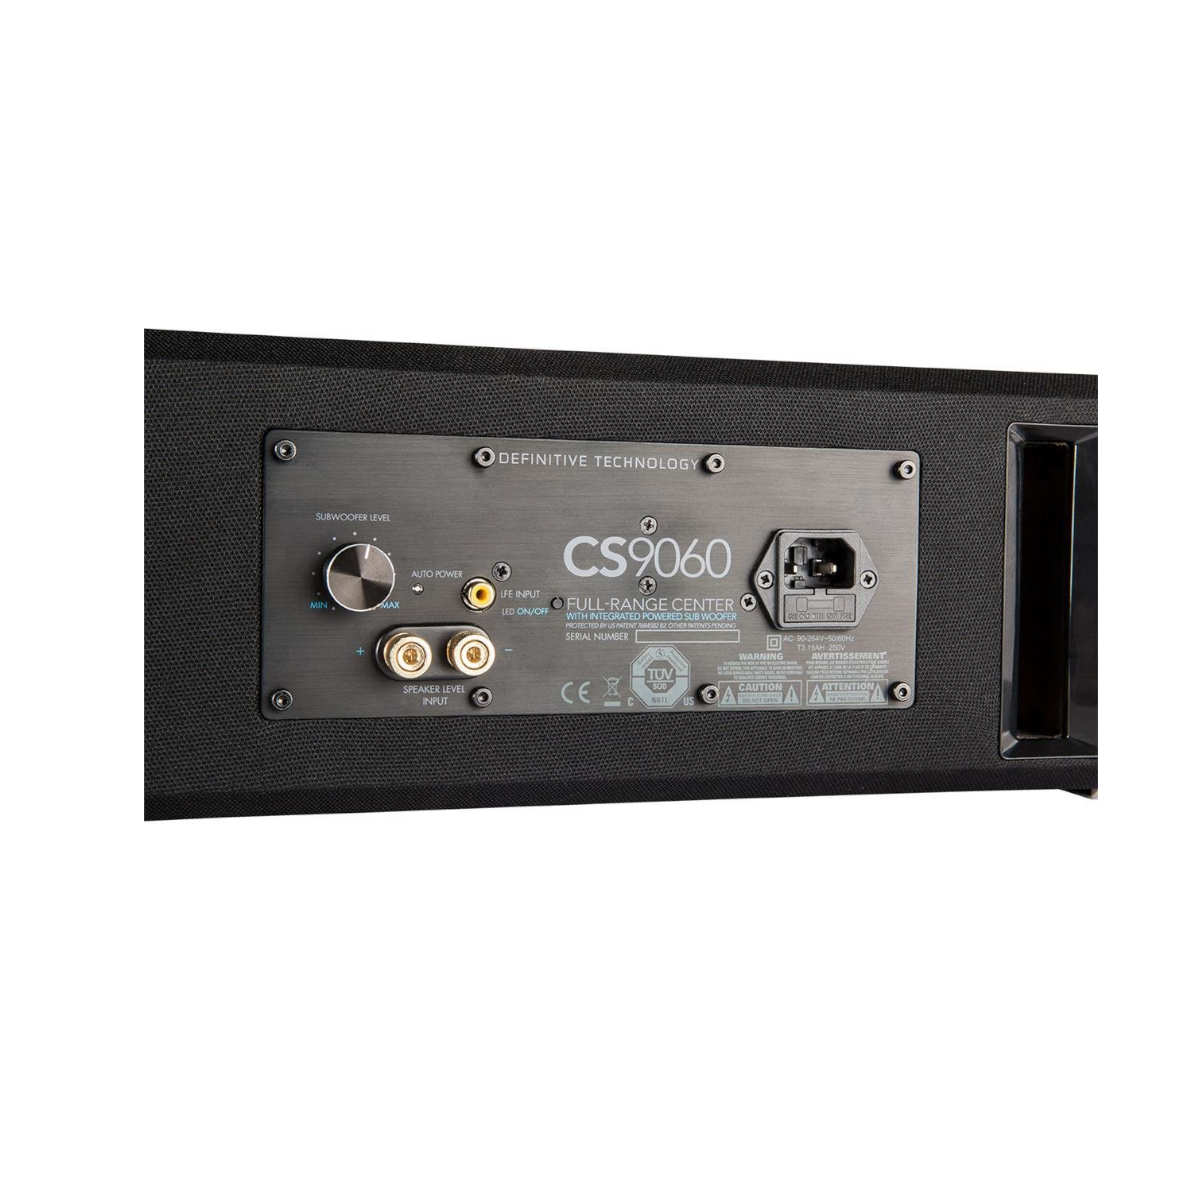 Definitive Technology CS9060 High-Performance Center Channel Speaker - Ooberpad India